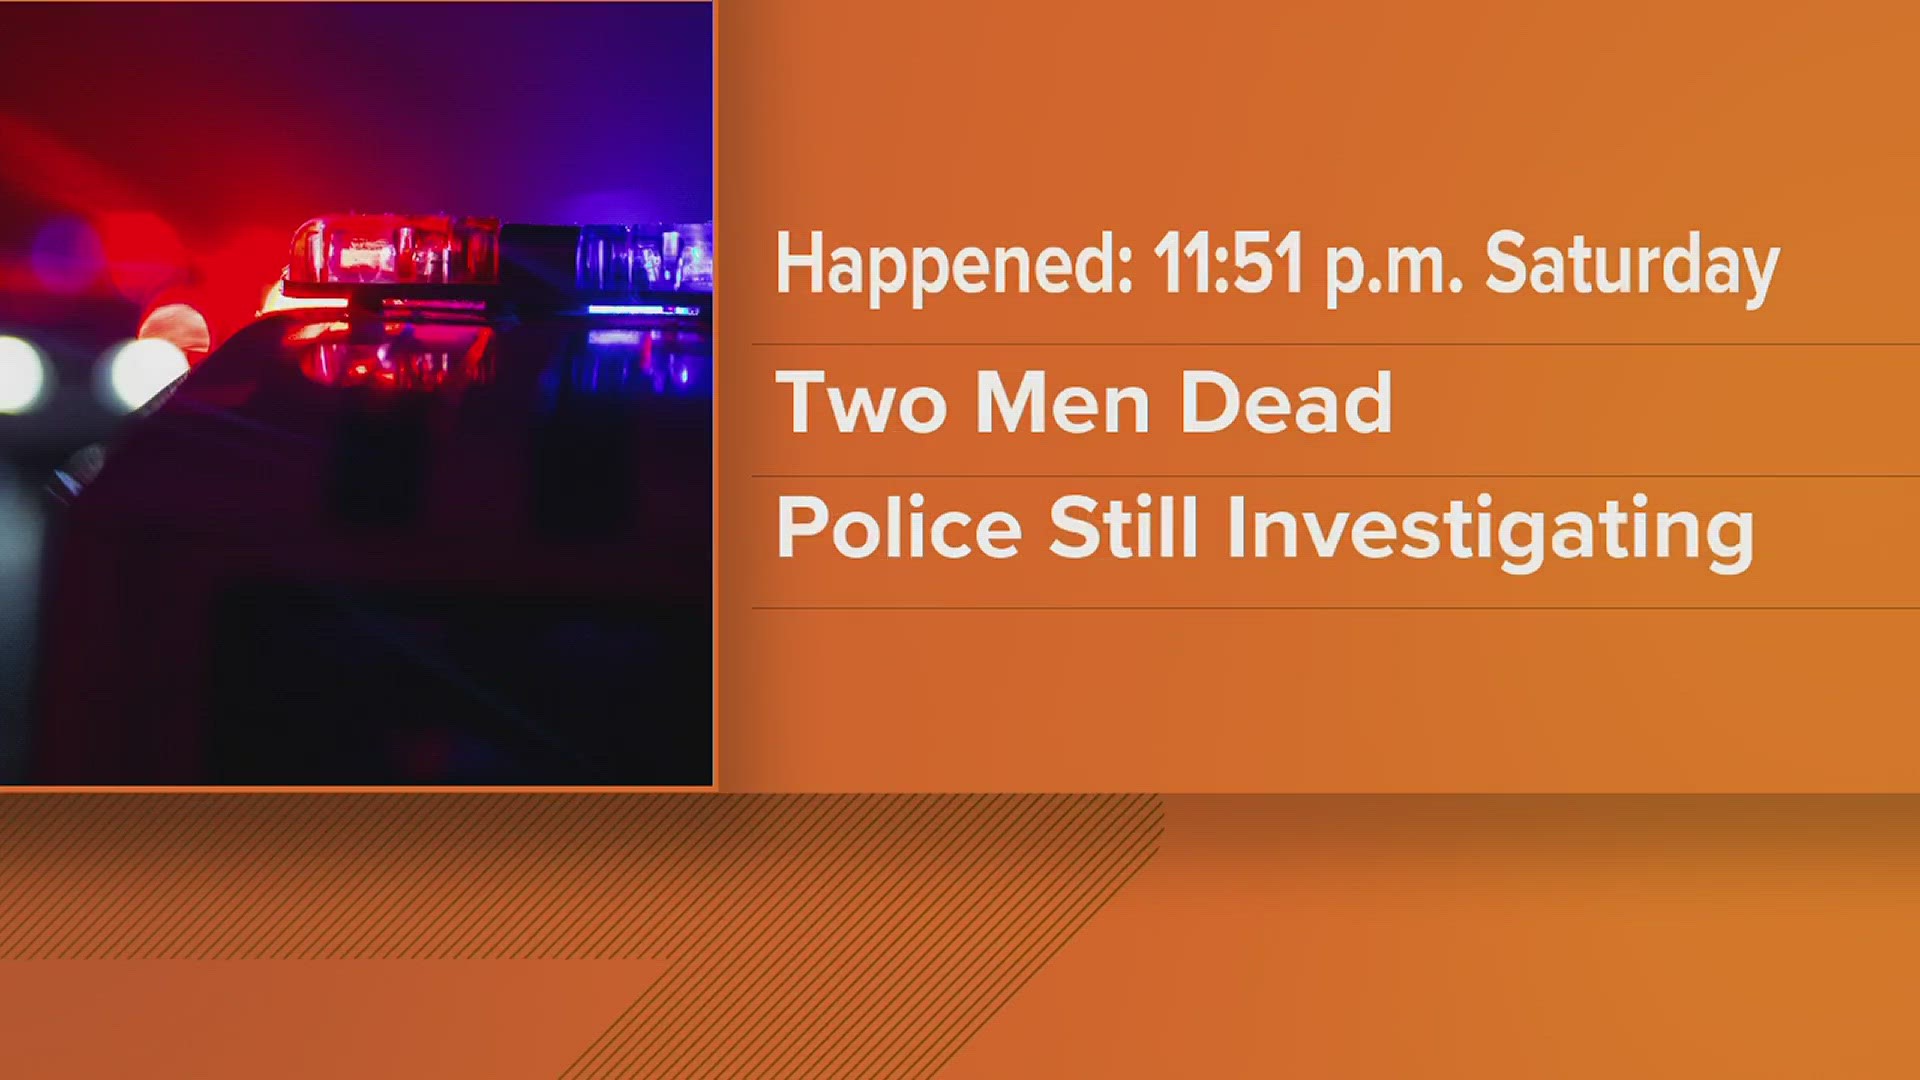 Davenport police found two men in an alley in the 1400 block of W. Fourth Street late Saturday night.